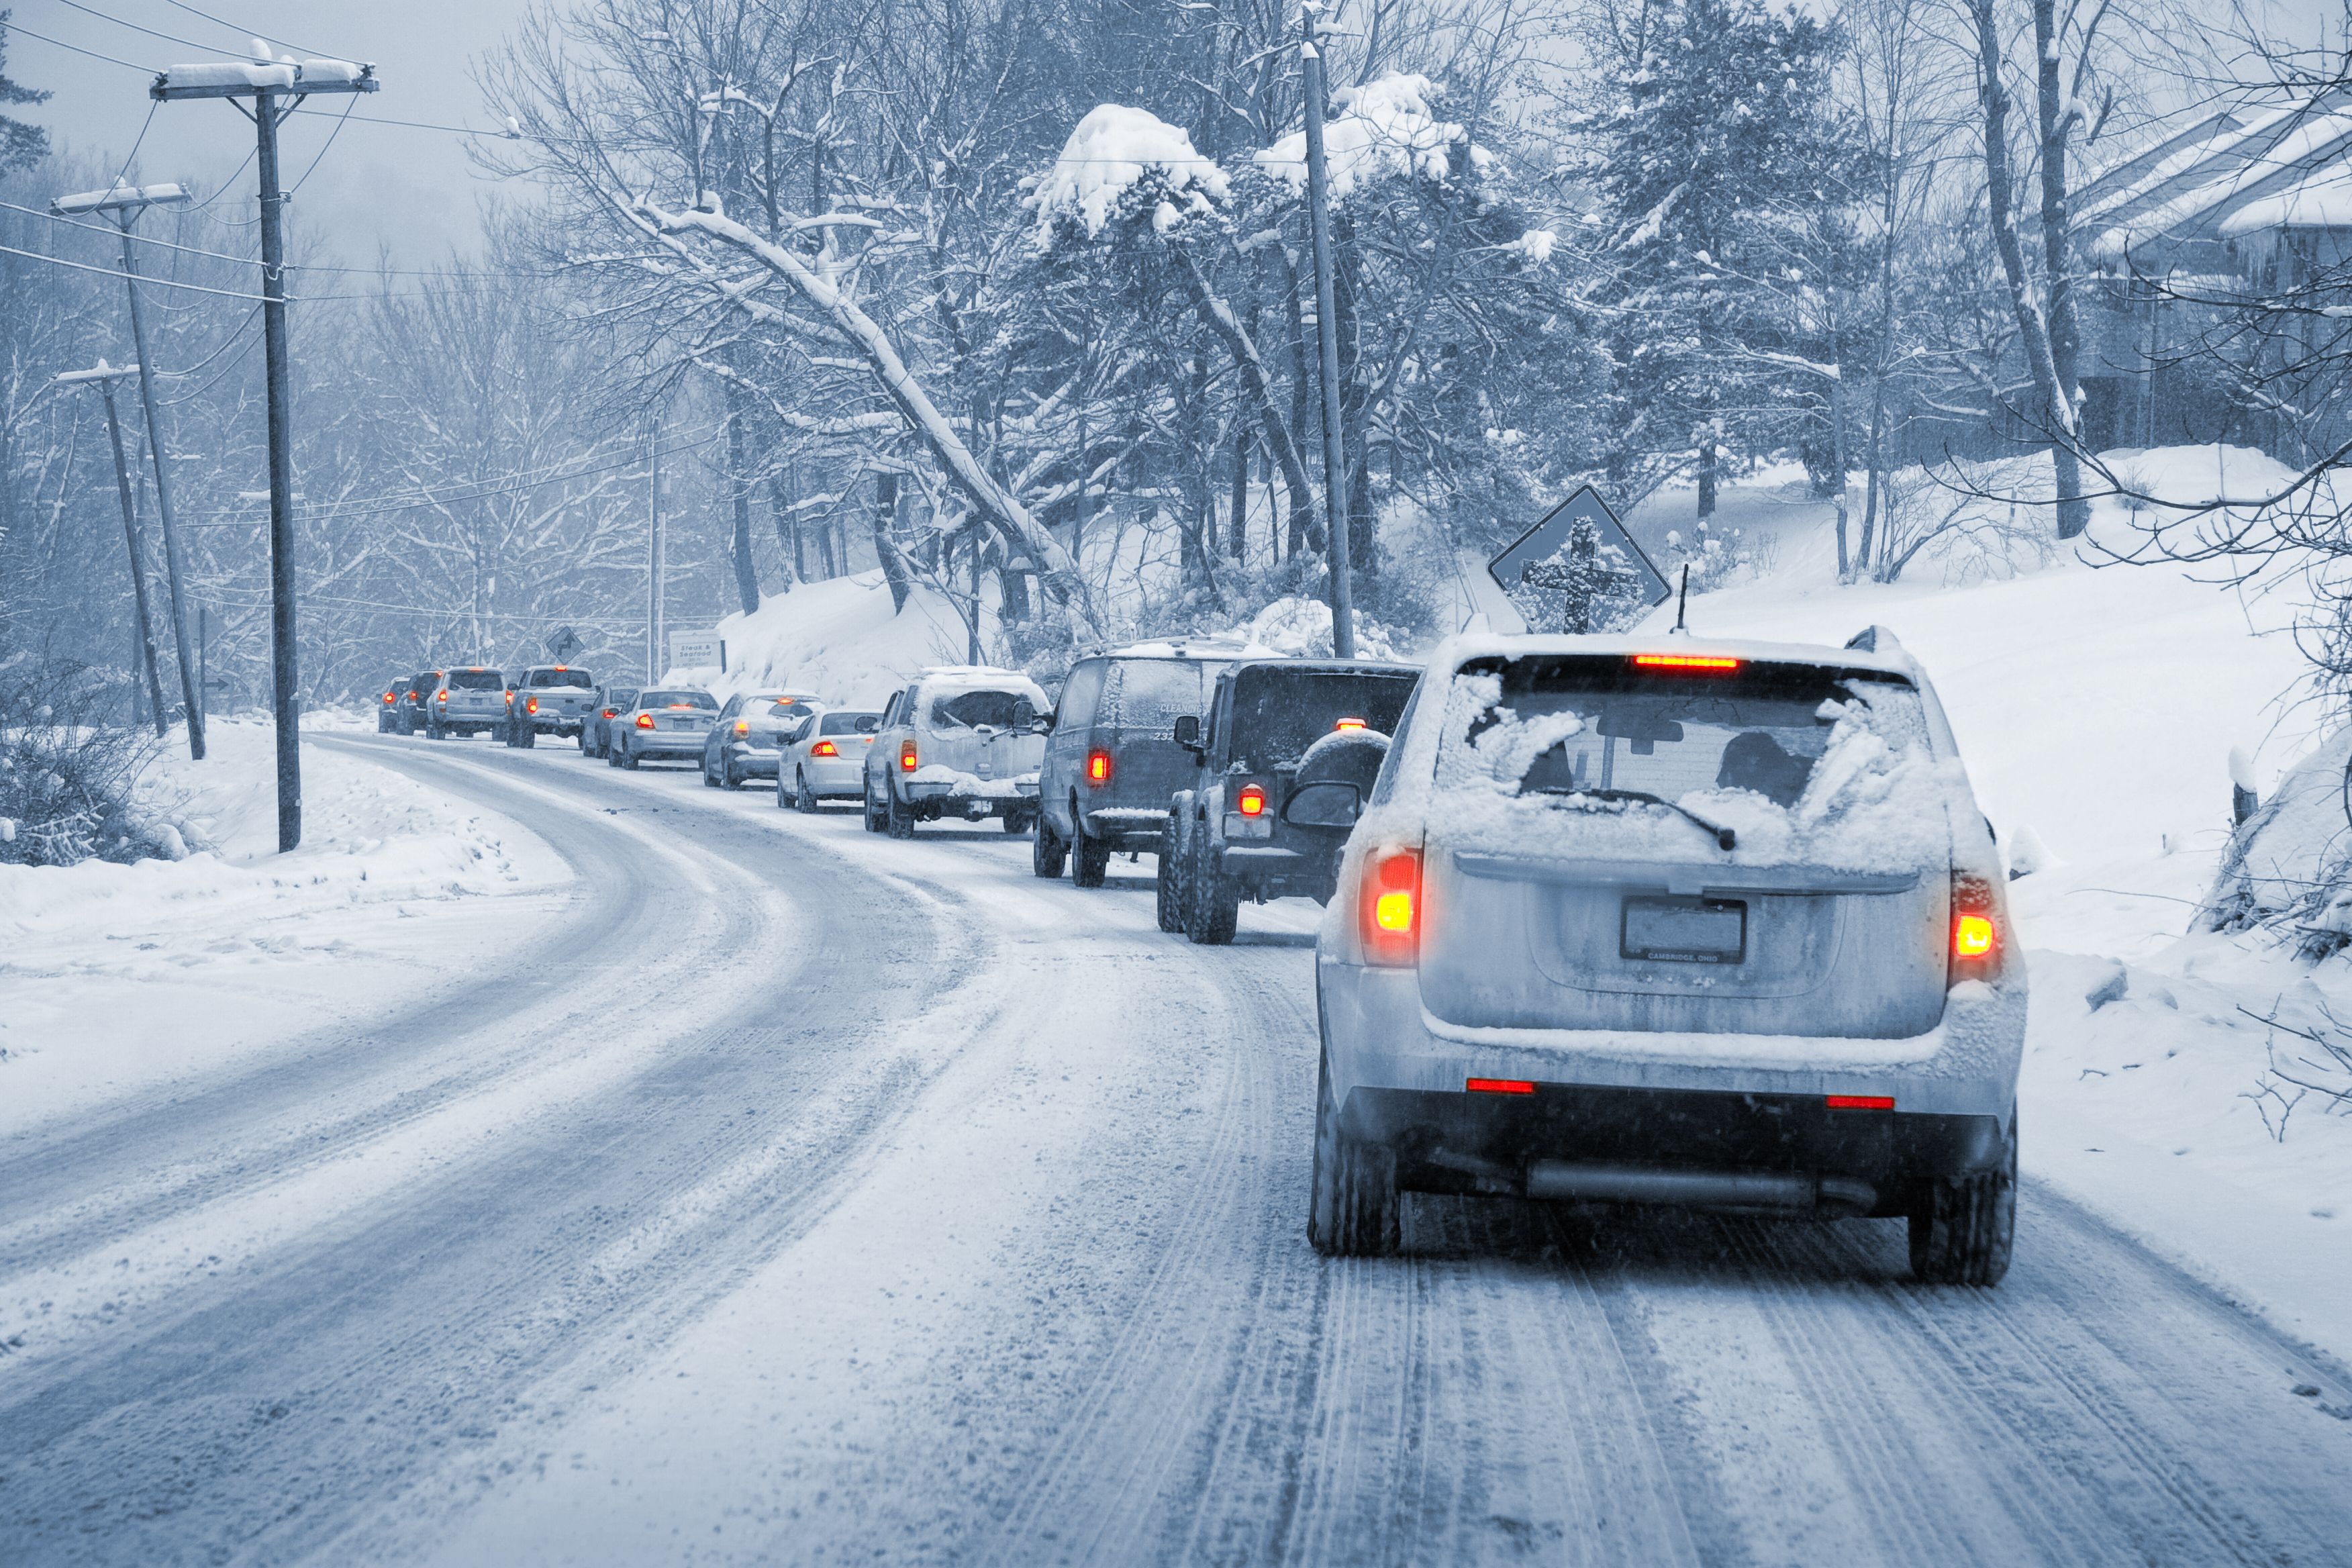 Advantages of All-Wheel Drive in Snowy Conditions